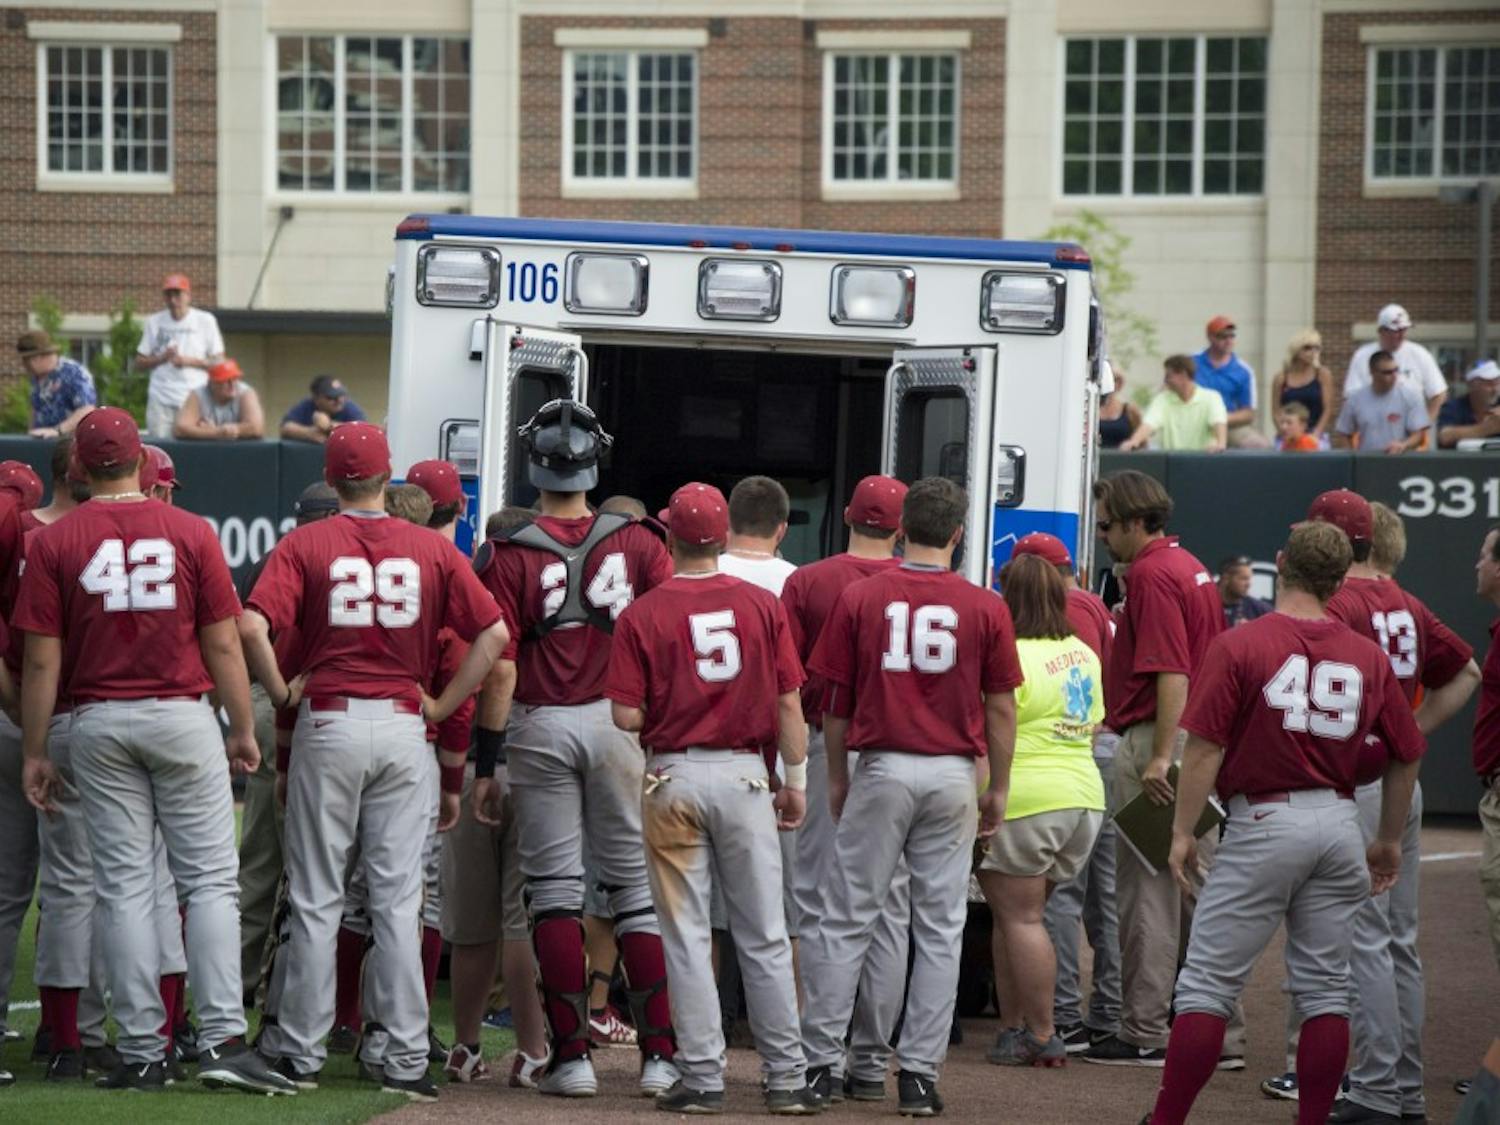 Chance Vincent is carried away in an ambulance after receiving a neck injury. His teammates gather around to see if he is OK. (Jordan Hays | Copy Editor)